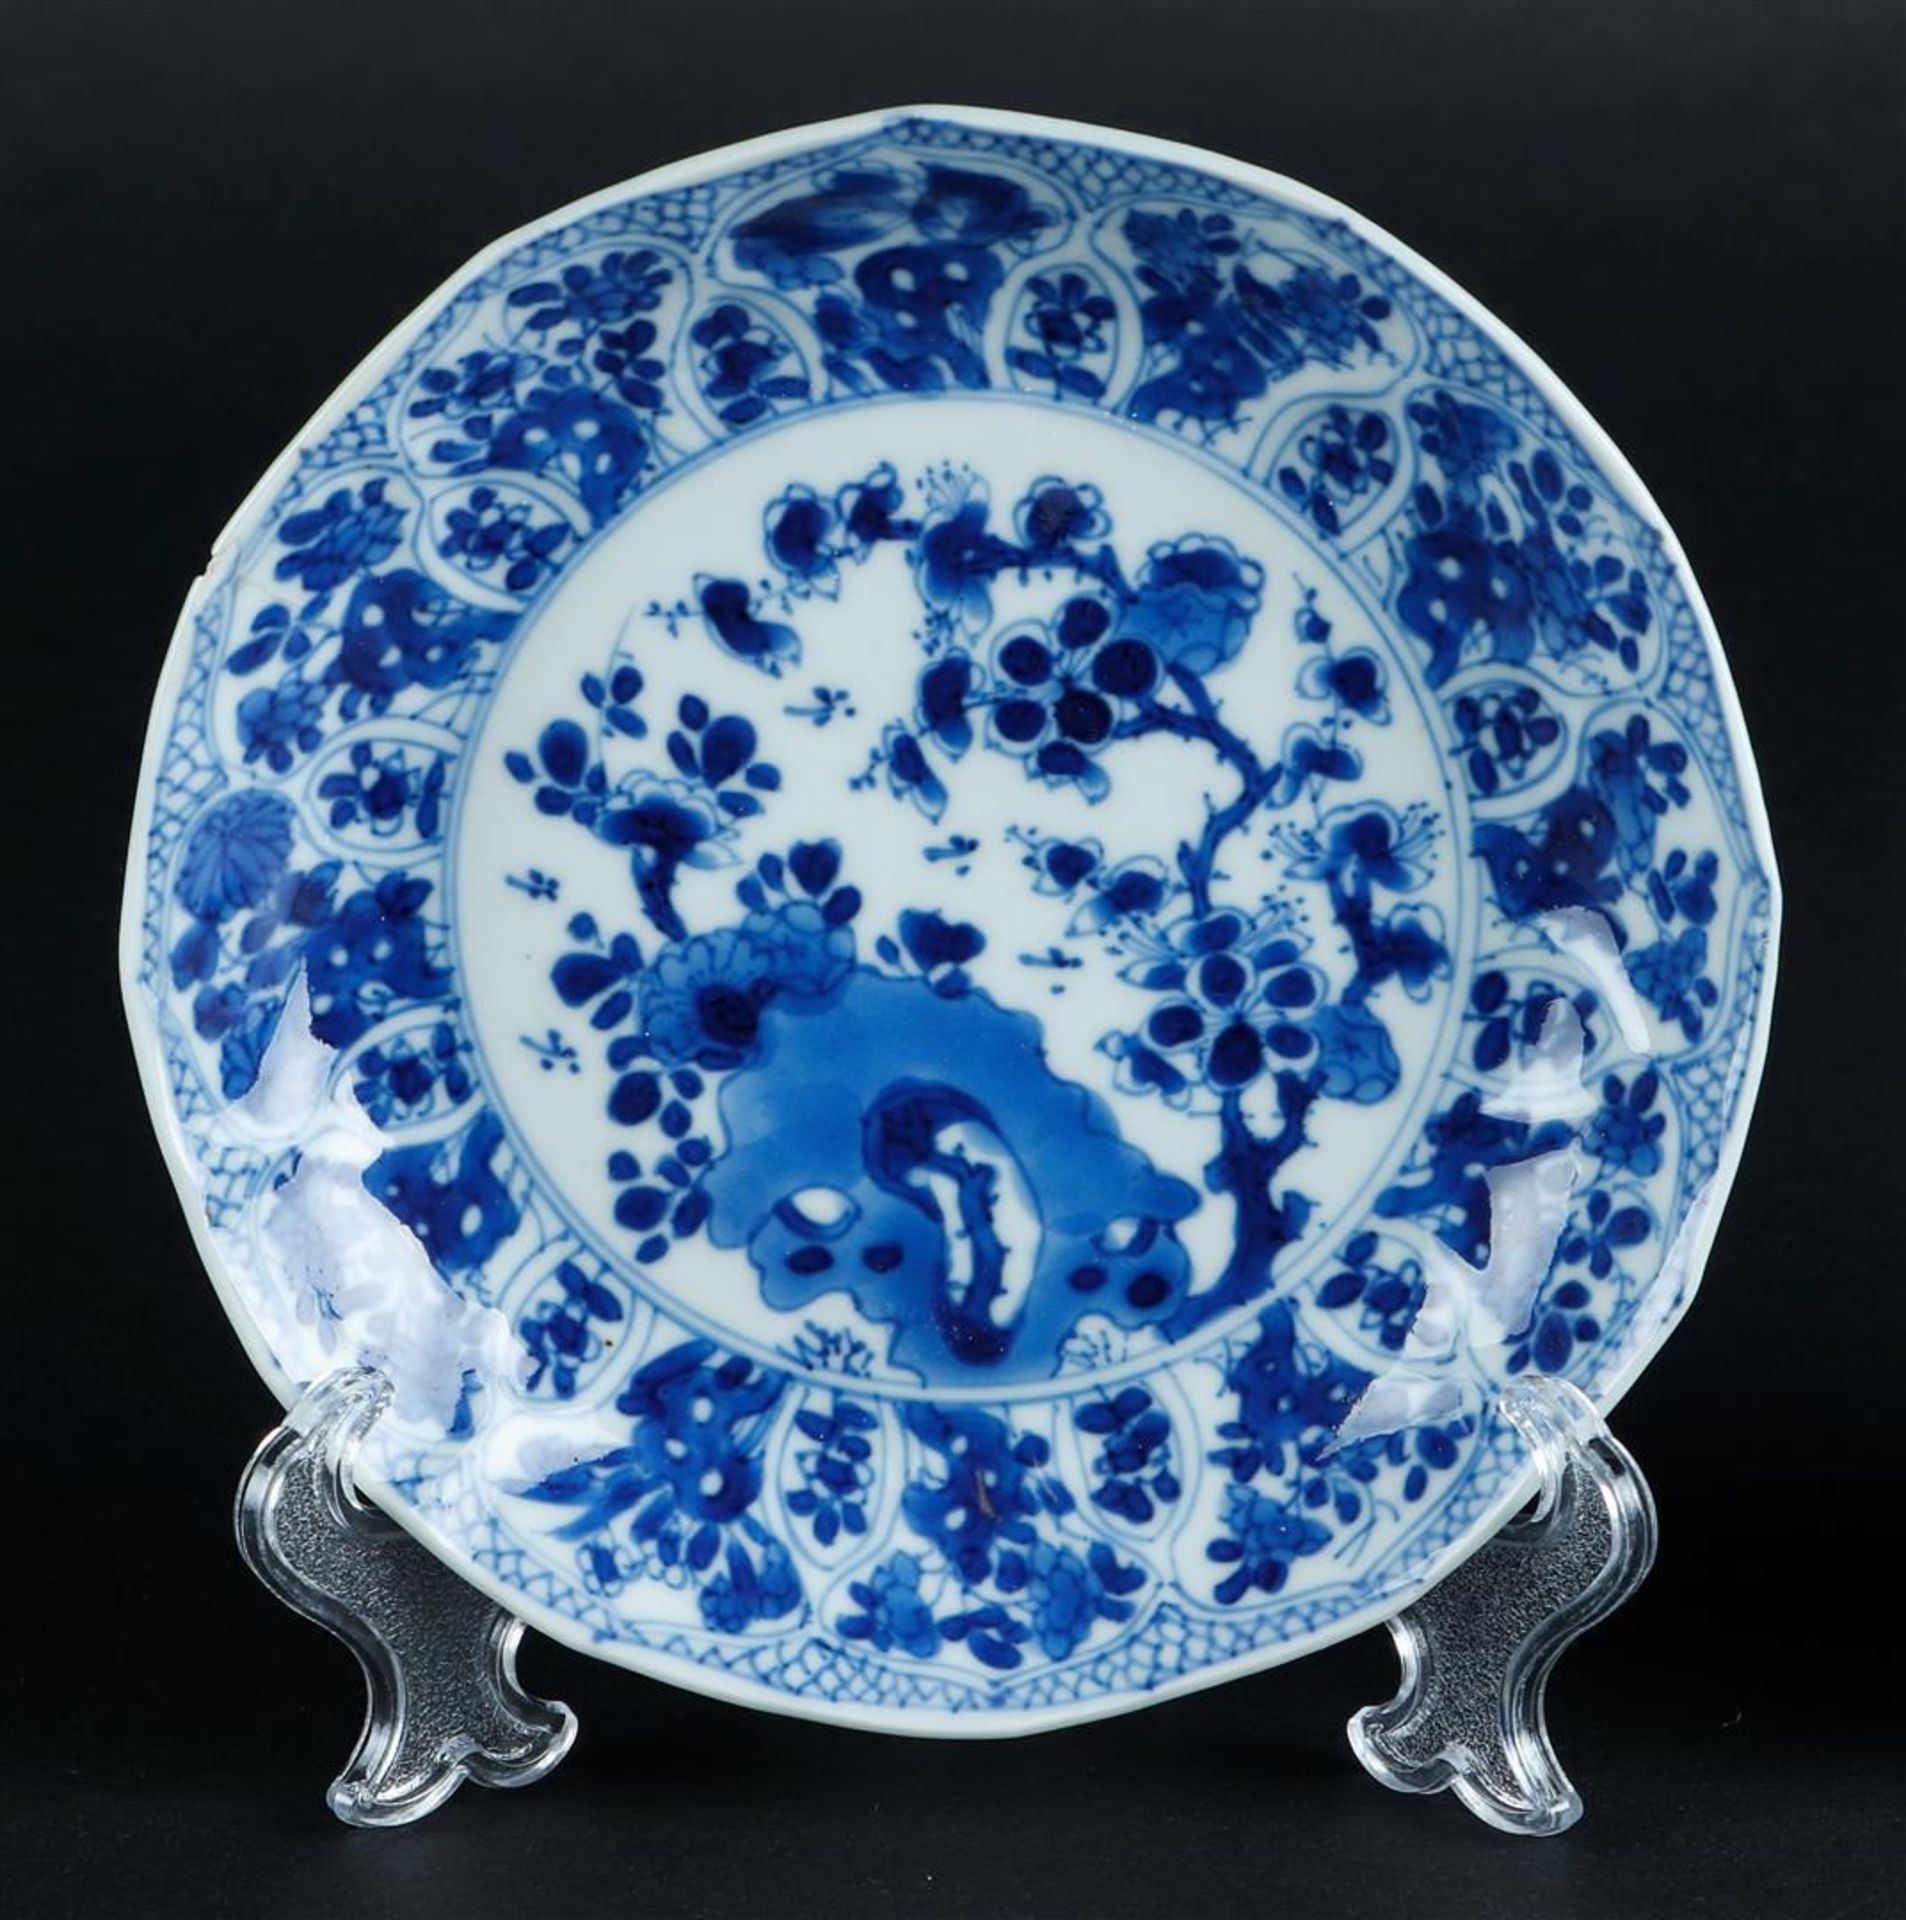 Two porcelain angled plates with relief lotus leaf, outer edge decor, the center with rich floral de - Image 4 of 5